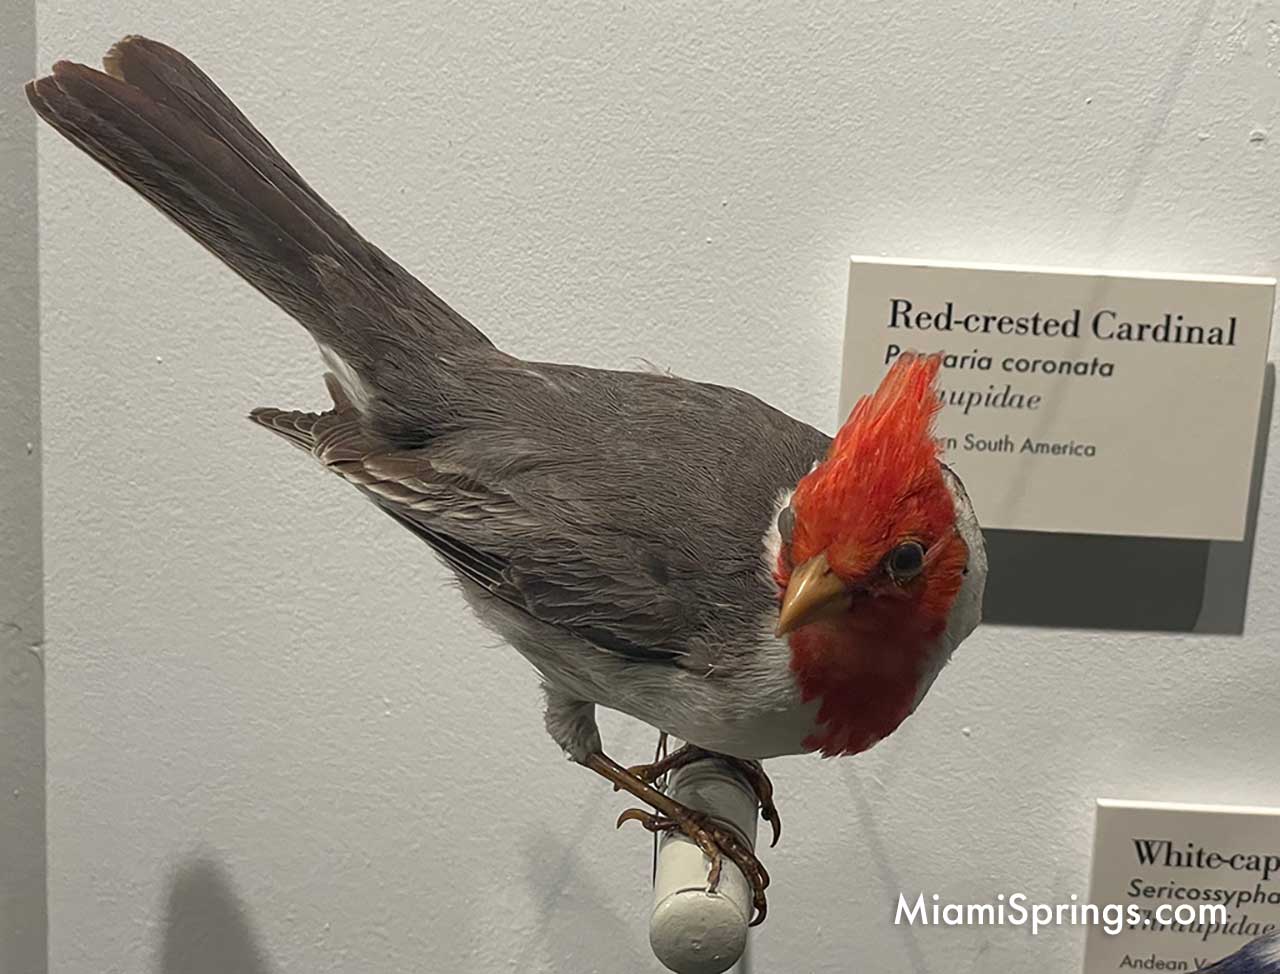 Red Crested Cardinal displayed at the Harvard Museum of Natural History